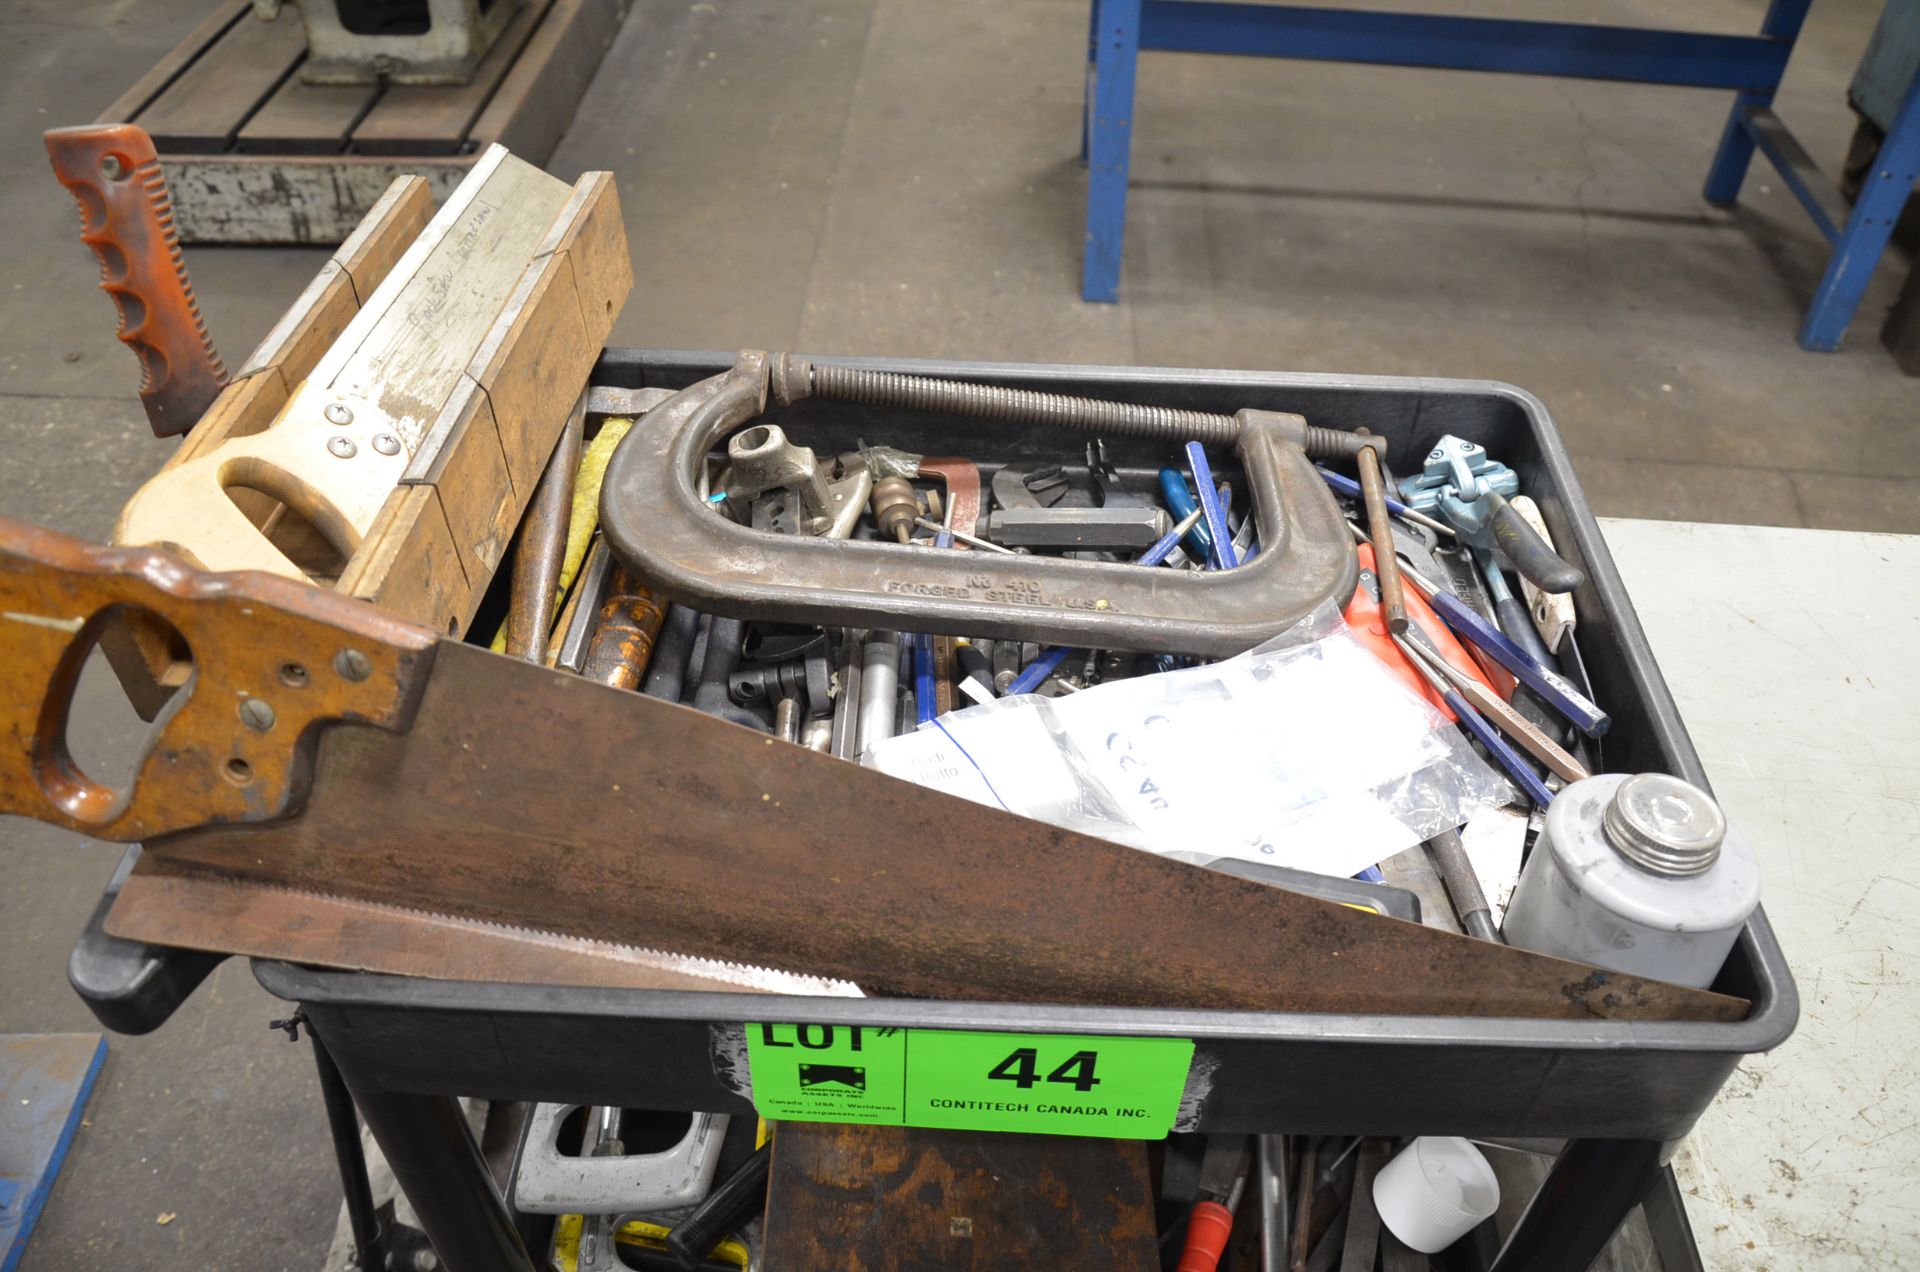 LOT/ HAND TOOLS WITH CART [RIGGING FEE FOR LOT #44 - $20 USD PLUS APPLICABLE TAXES] - Image 2 of 4